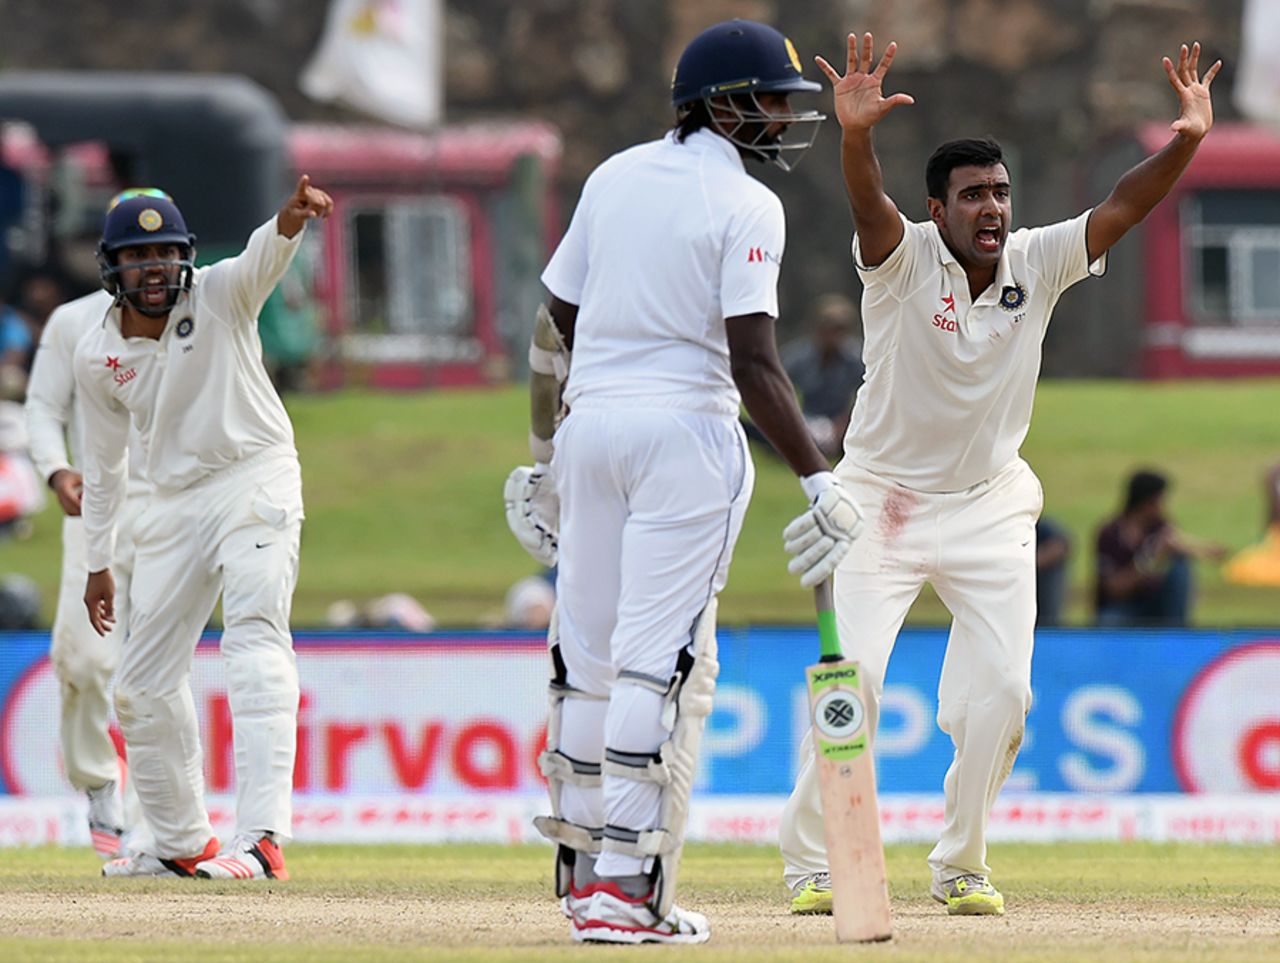 R Ashwin appeals for a wicket, Sri Lanka v India, 1st Test, Galle, 1st day, August 12, 2015